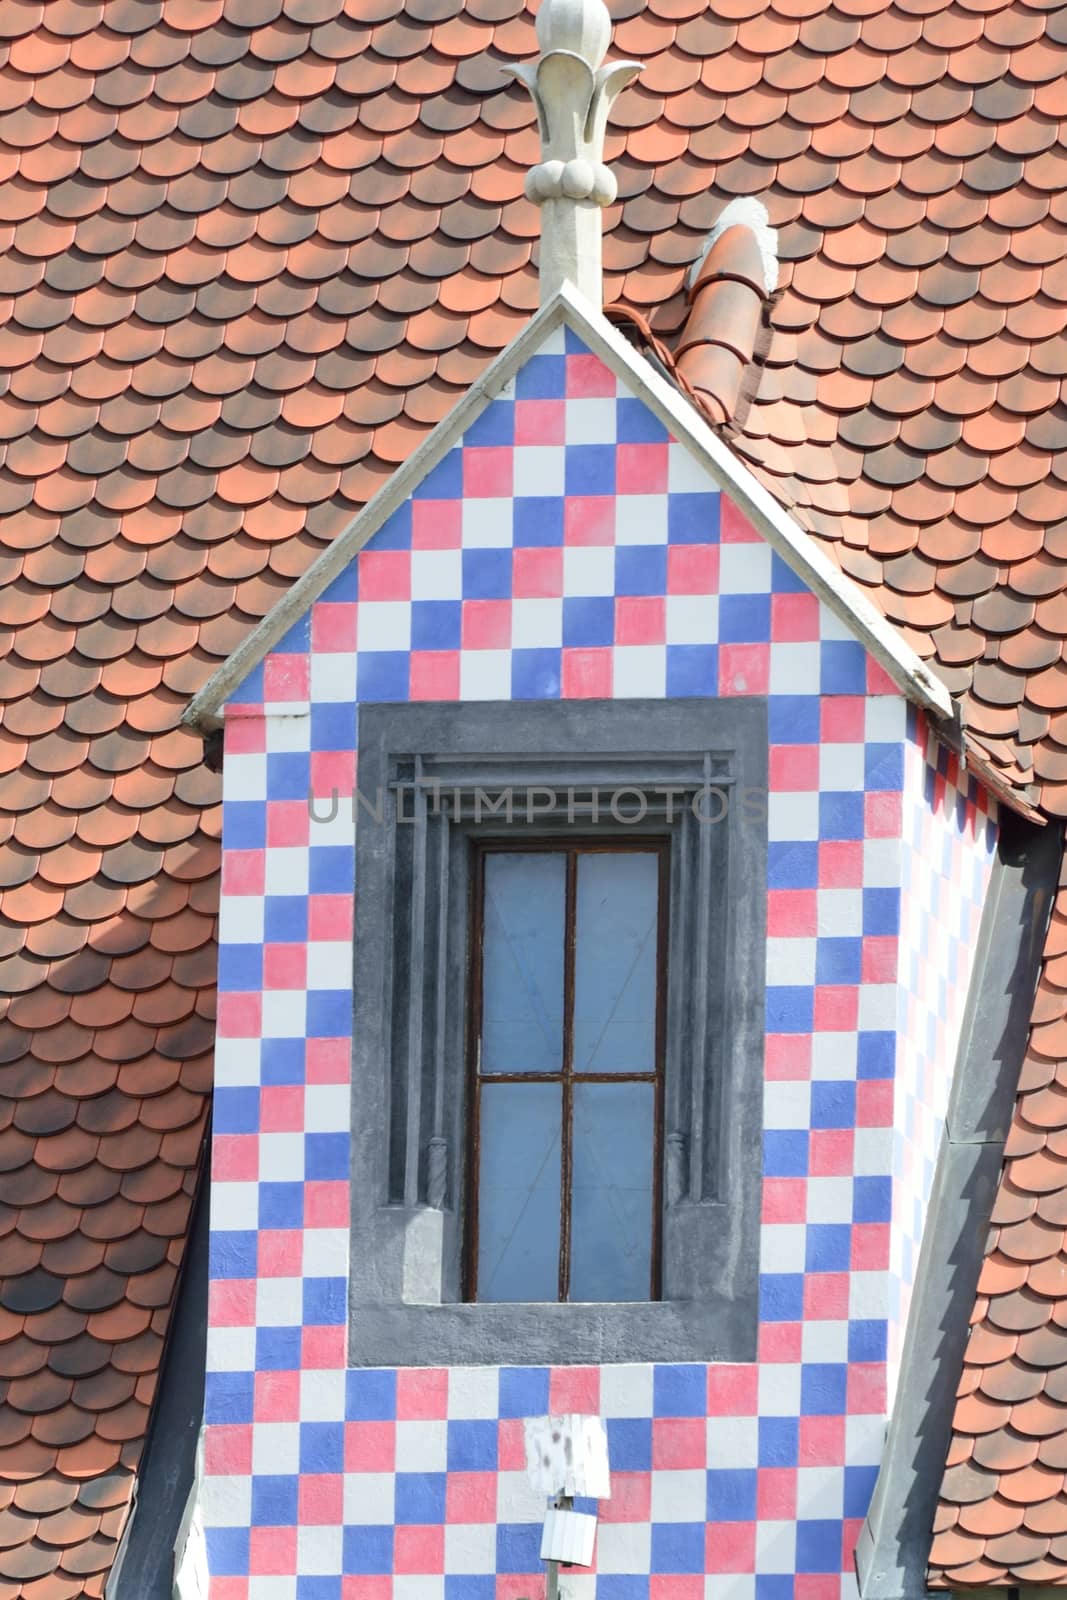 Medieval chequered windows by pauws99